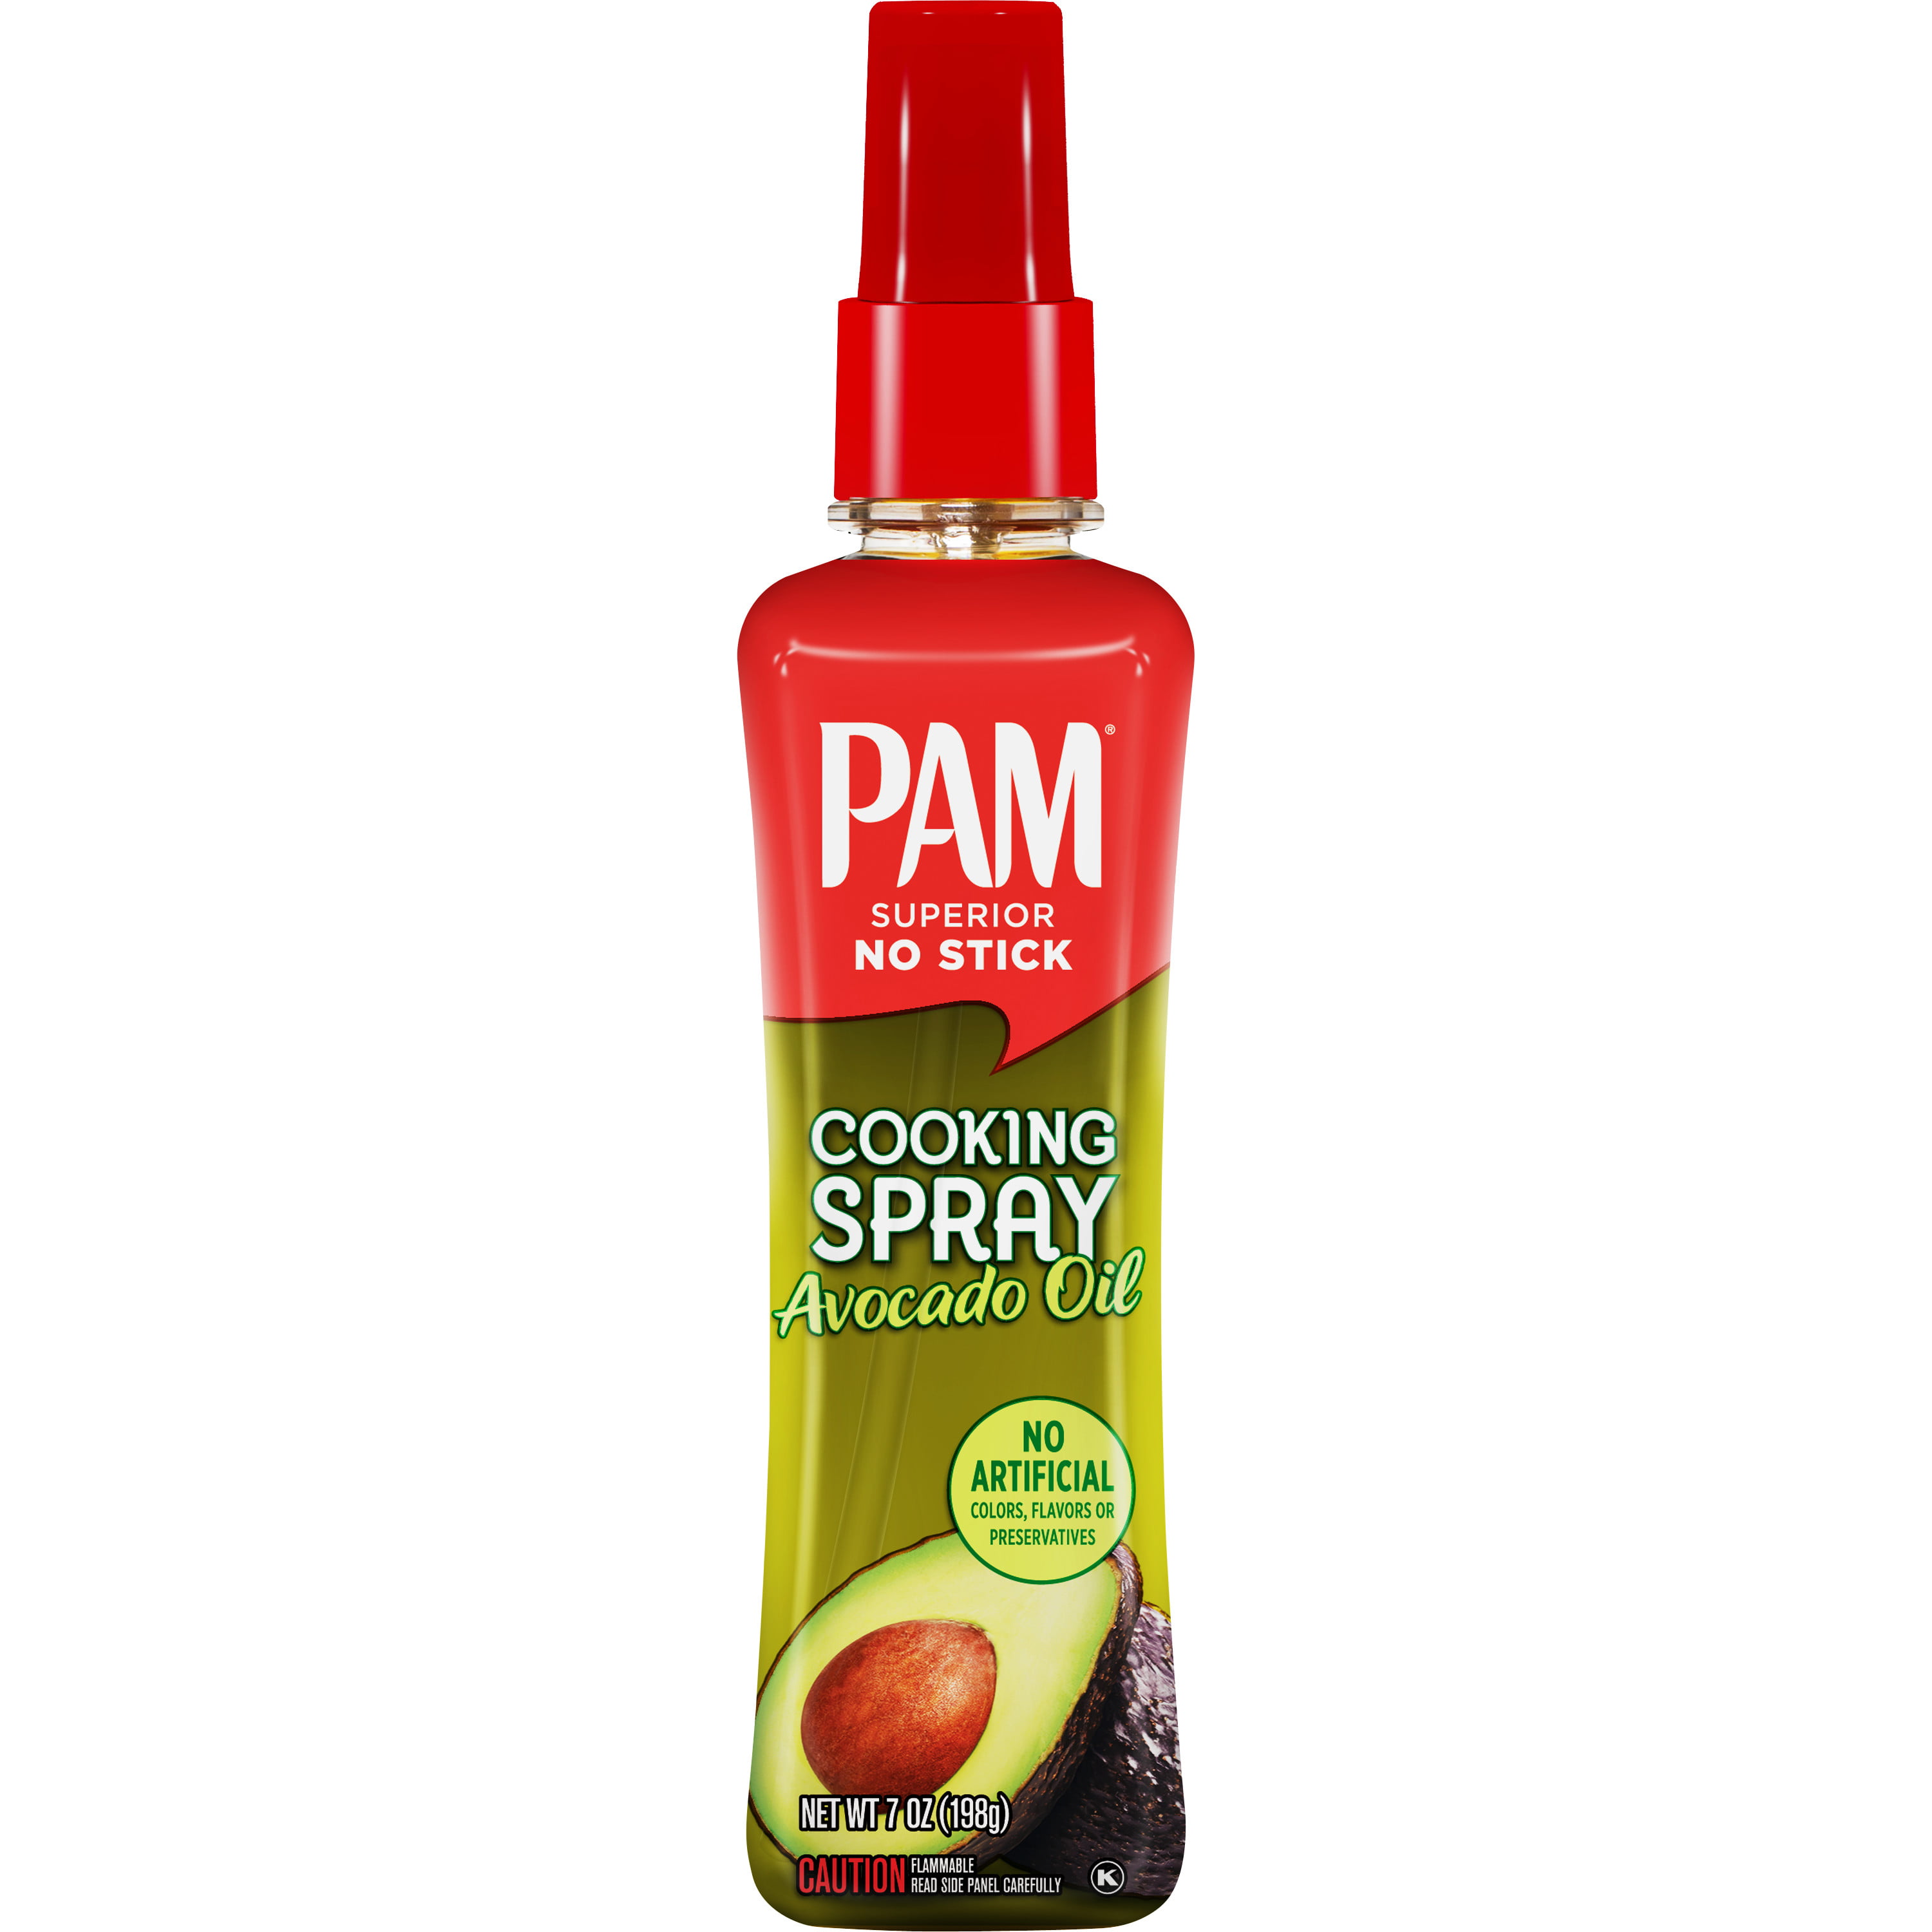 Save on PAM No-Stick Cooking Spray Avocado Oil Order Online Delivery